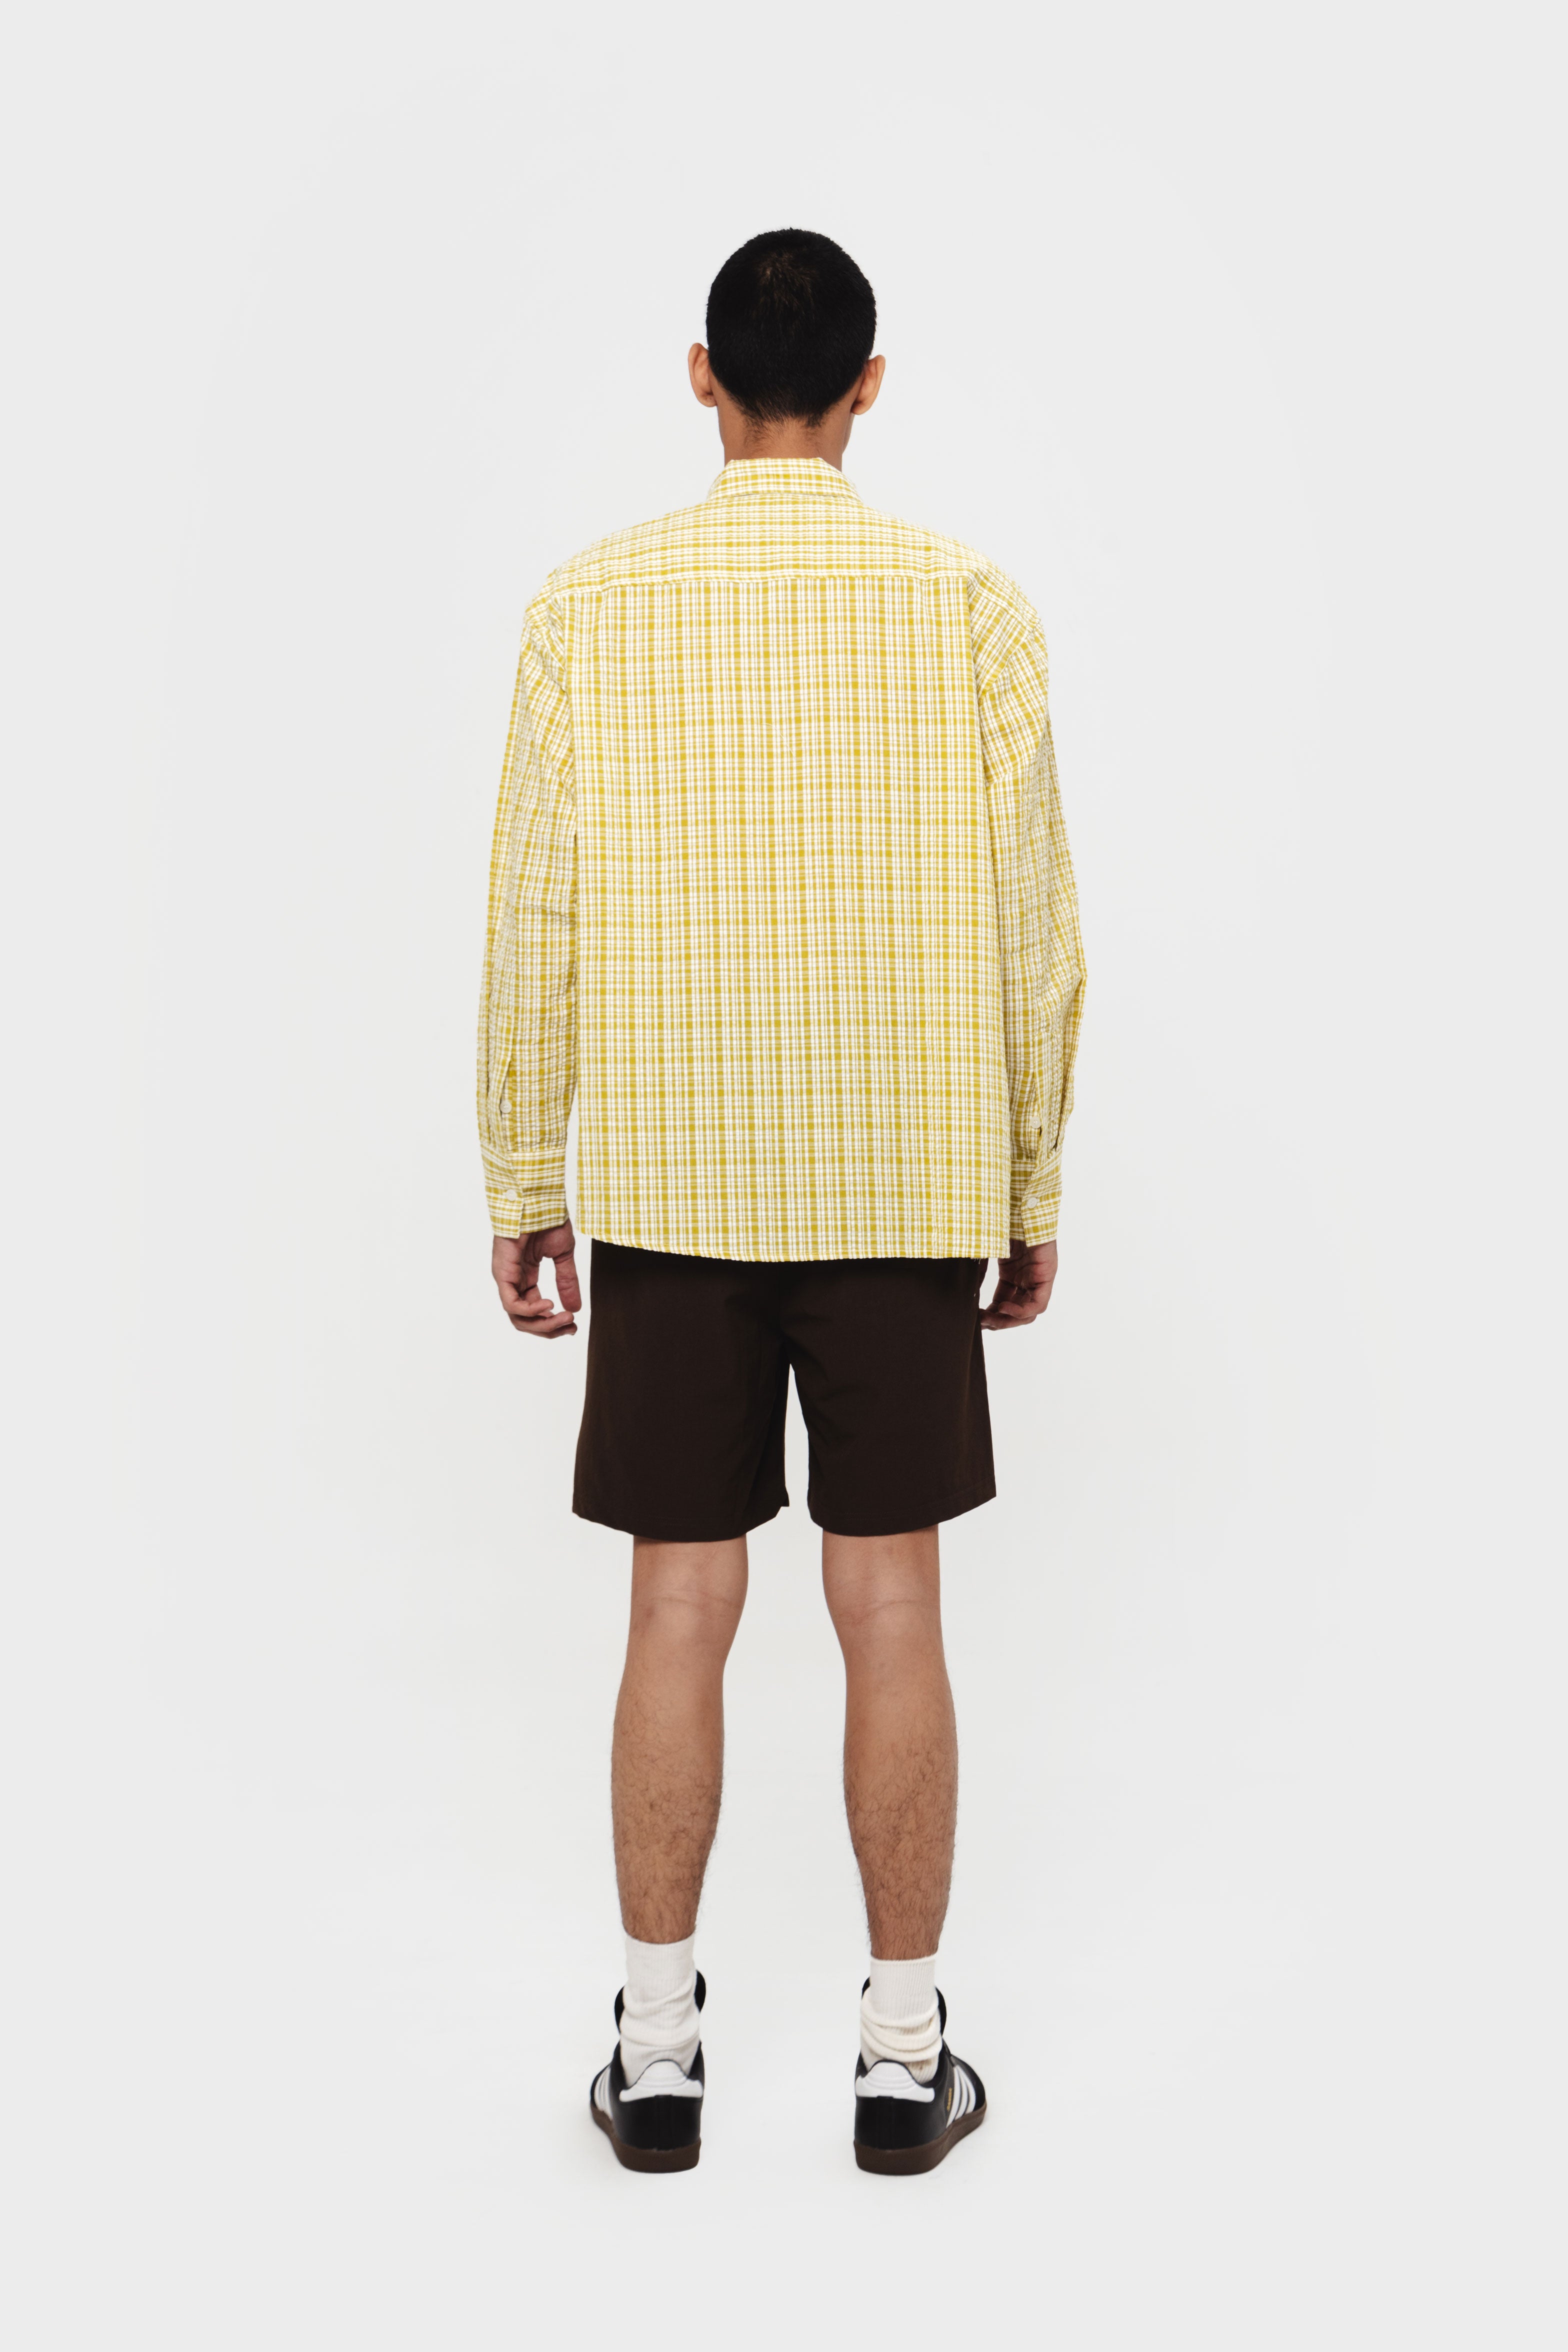 LITHGOW SHIRT YELLOW